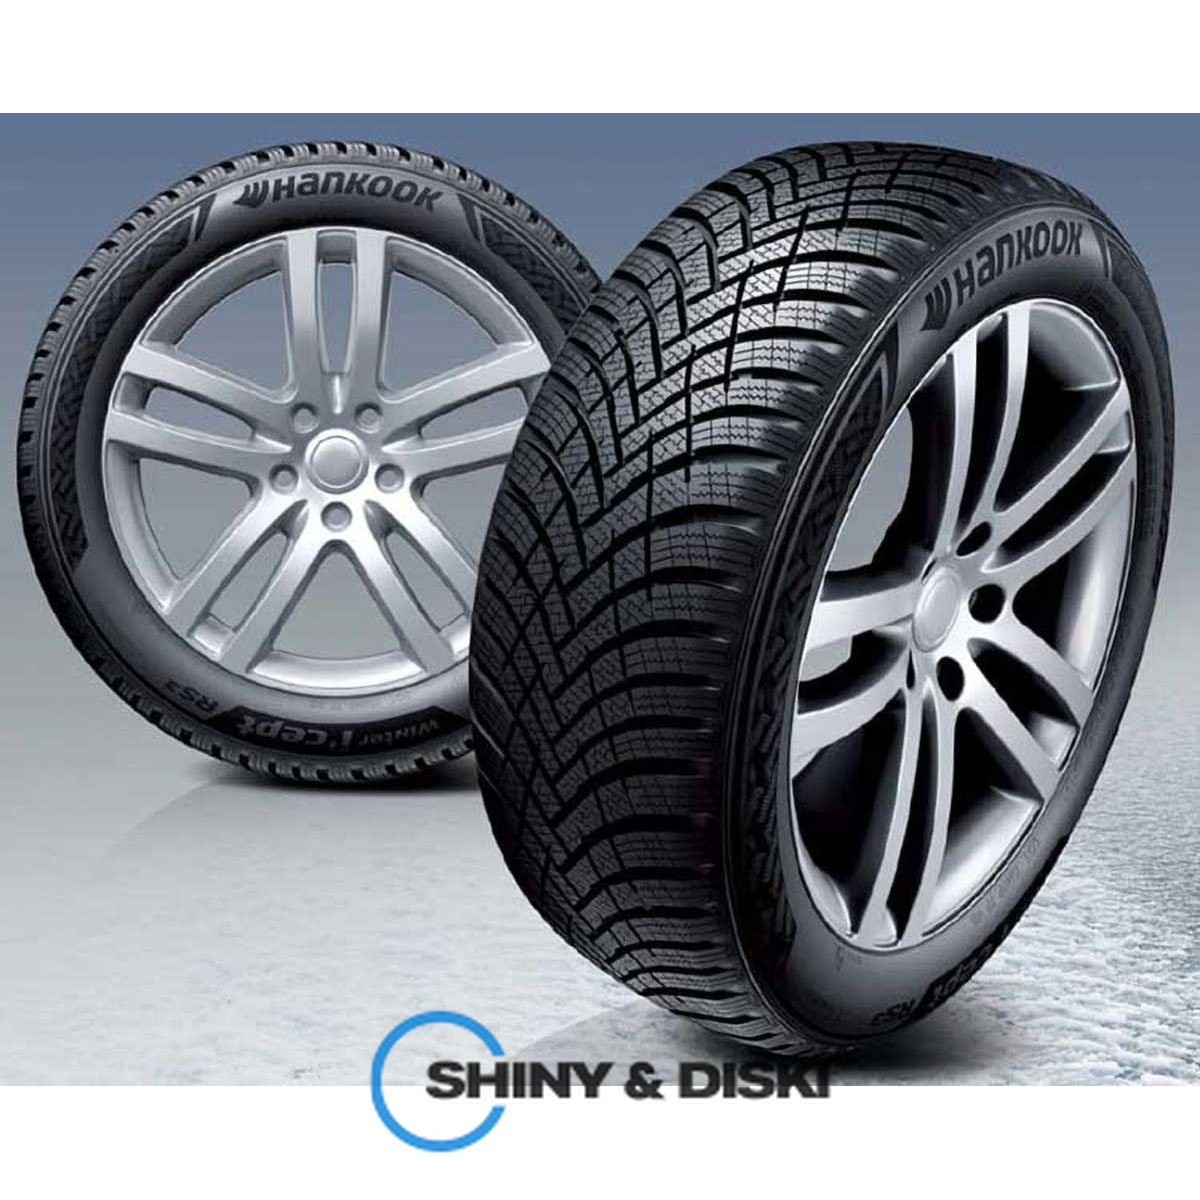 покрышки hankook winter i*cept rs3 w462 195/55 r16 91h xl